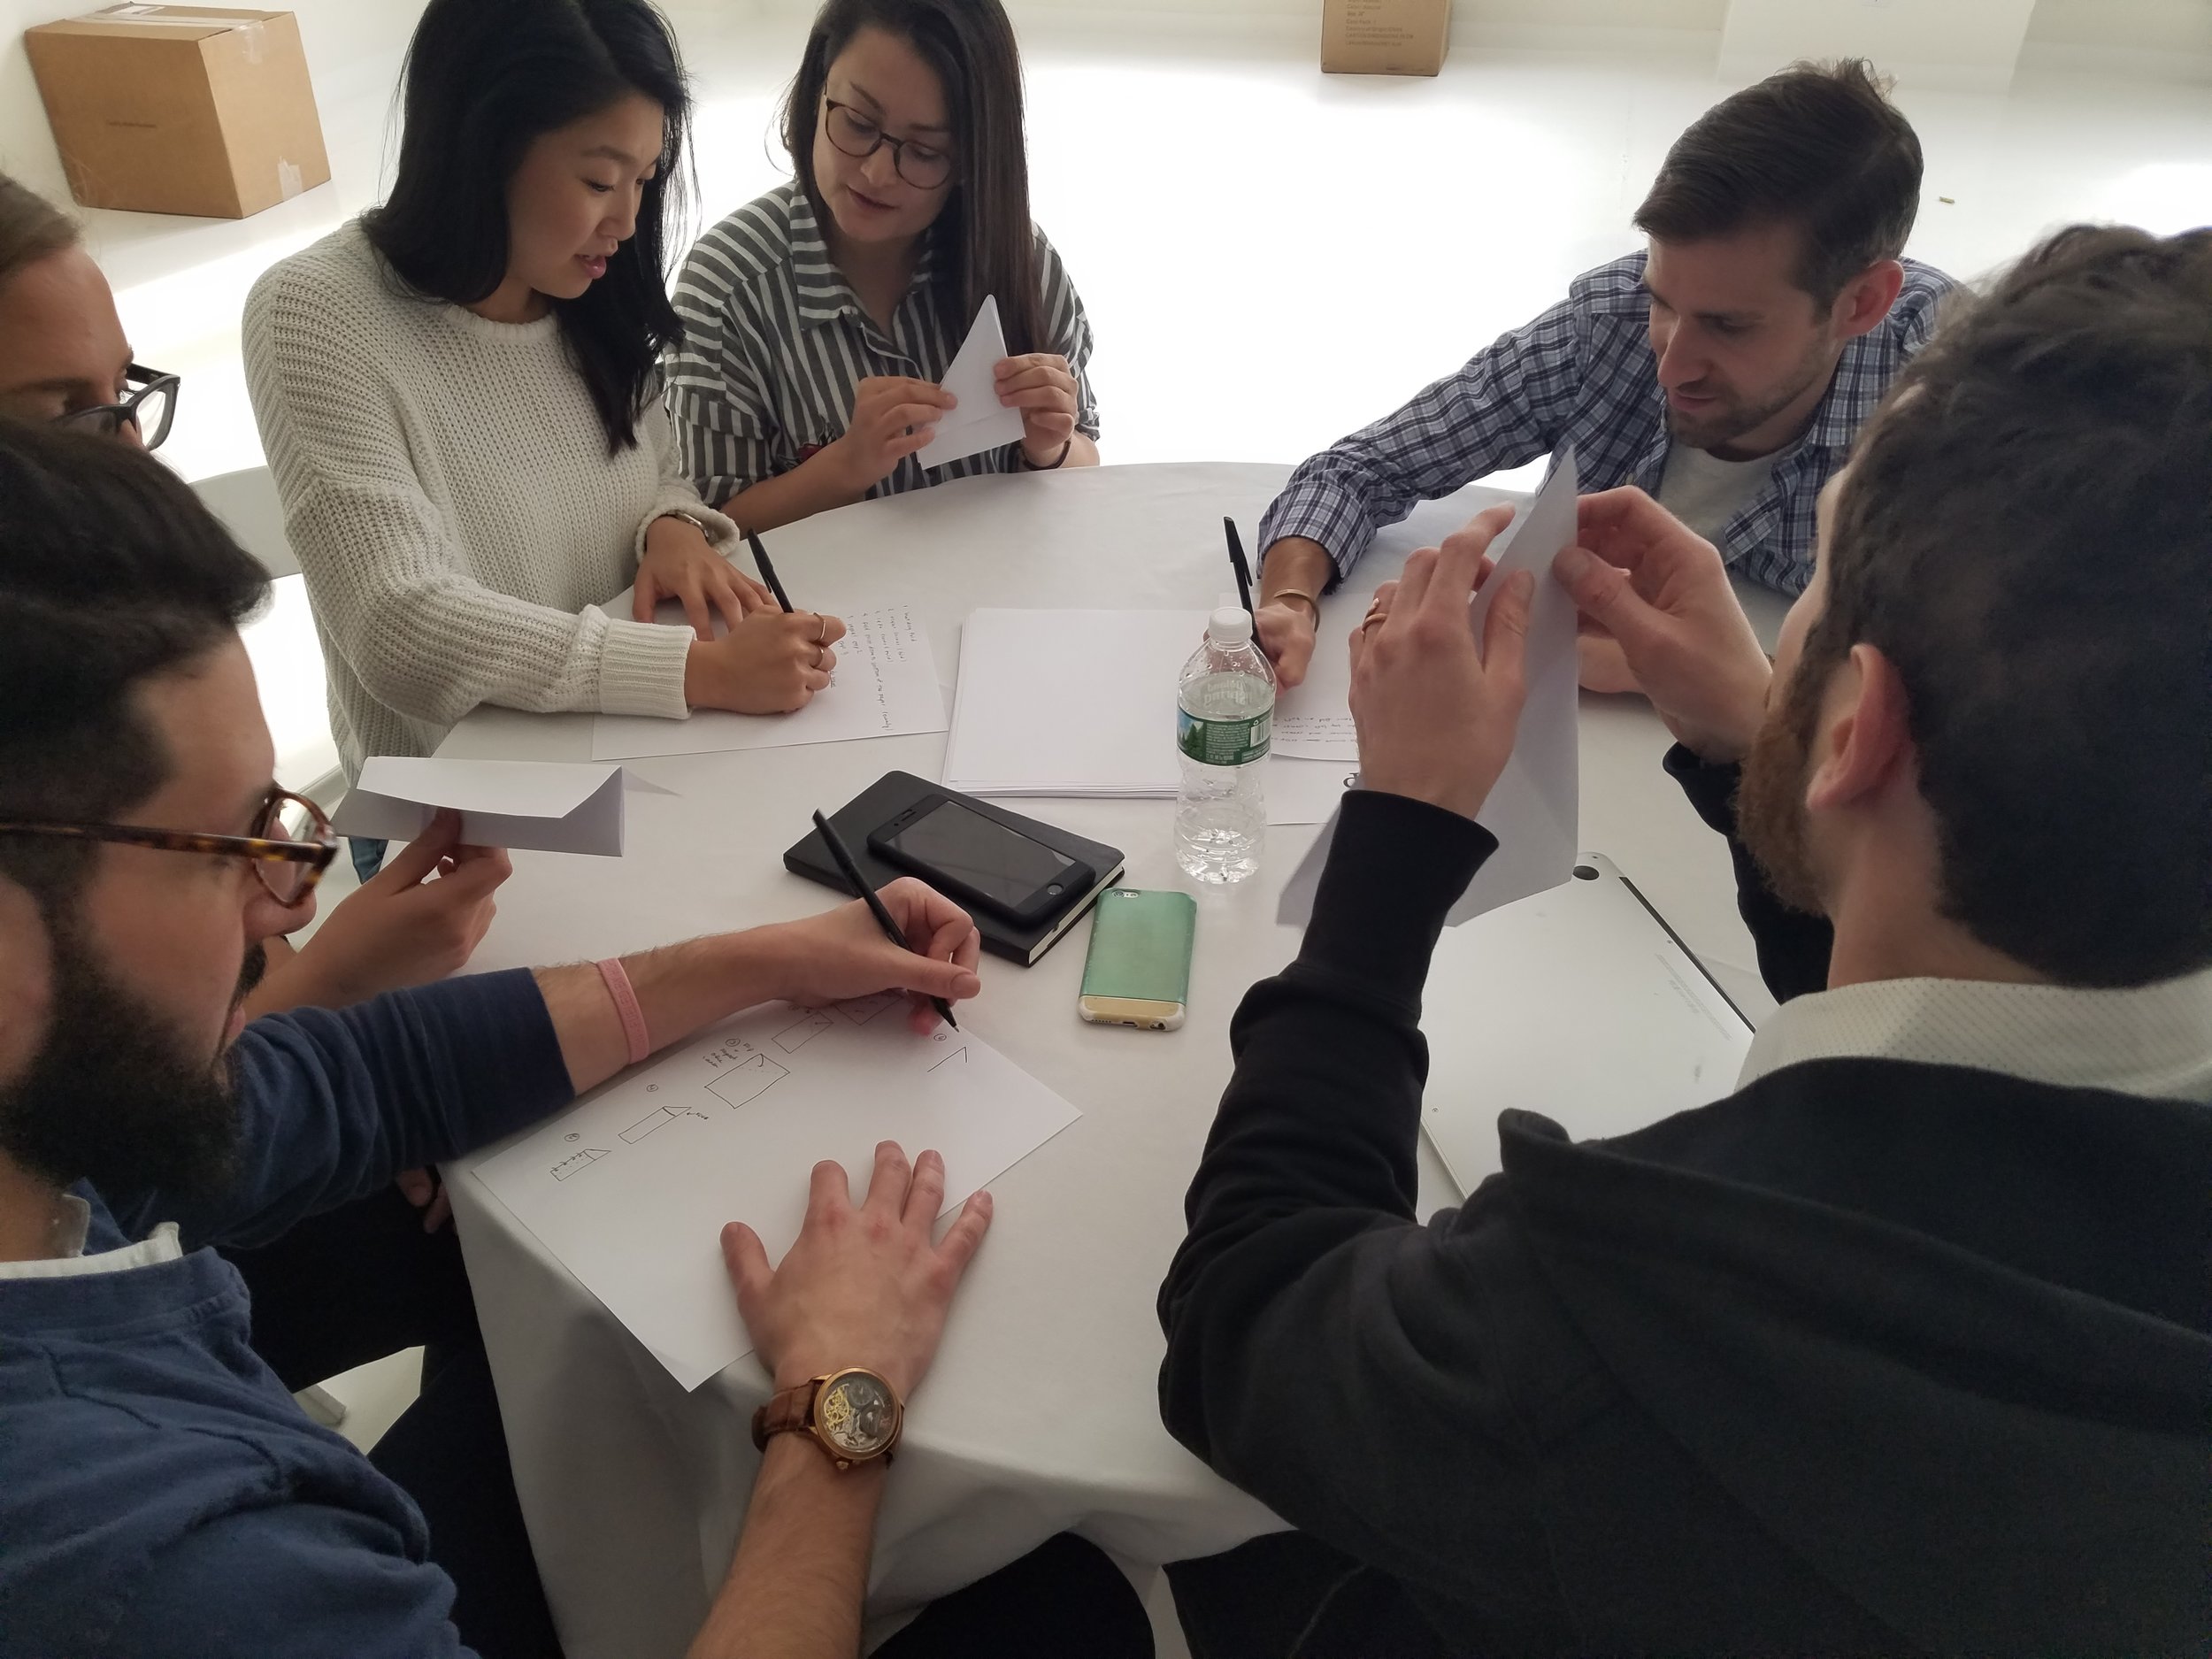 A communications style workshop using Origami